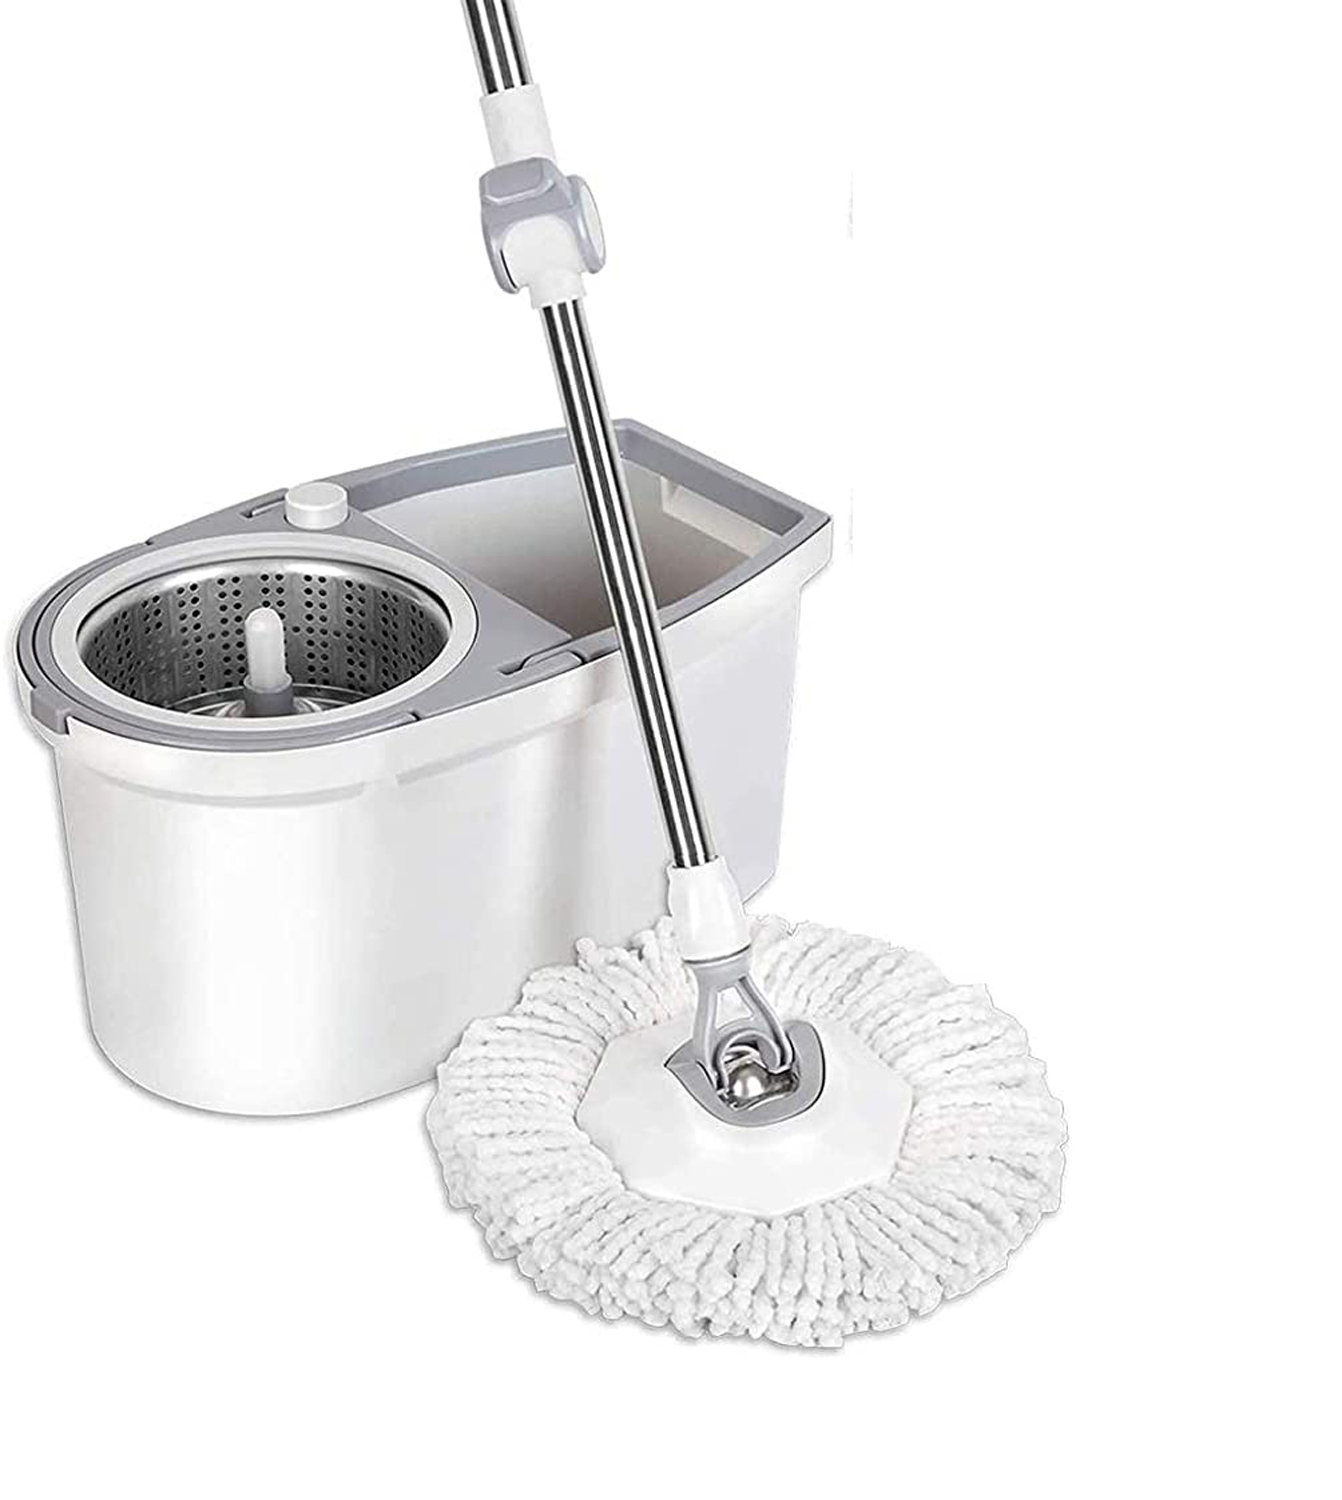 Spin mop bucket set with clean tablet holder easy for use